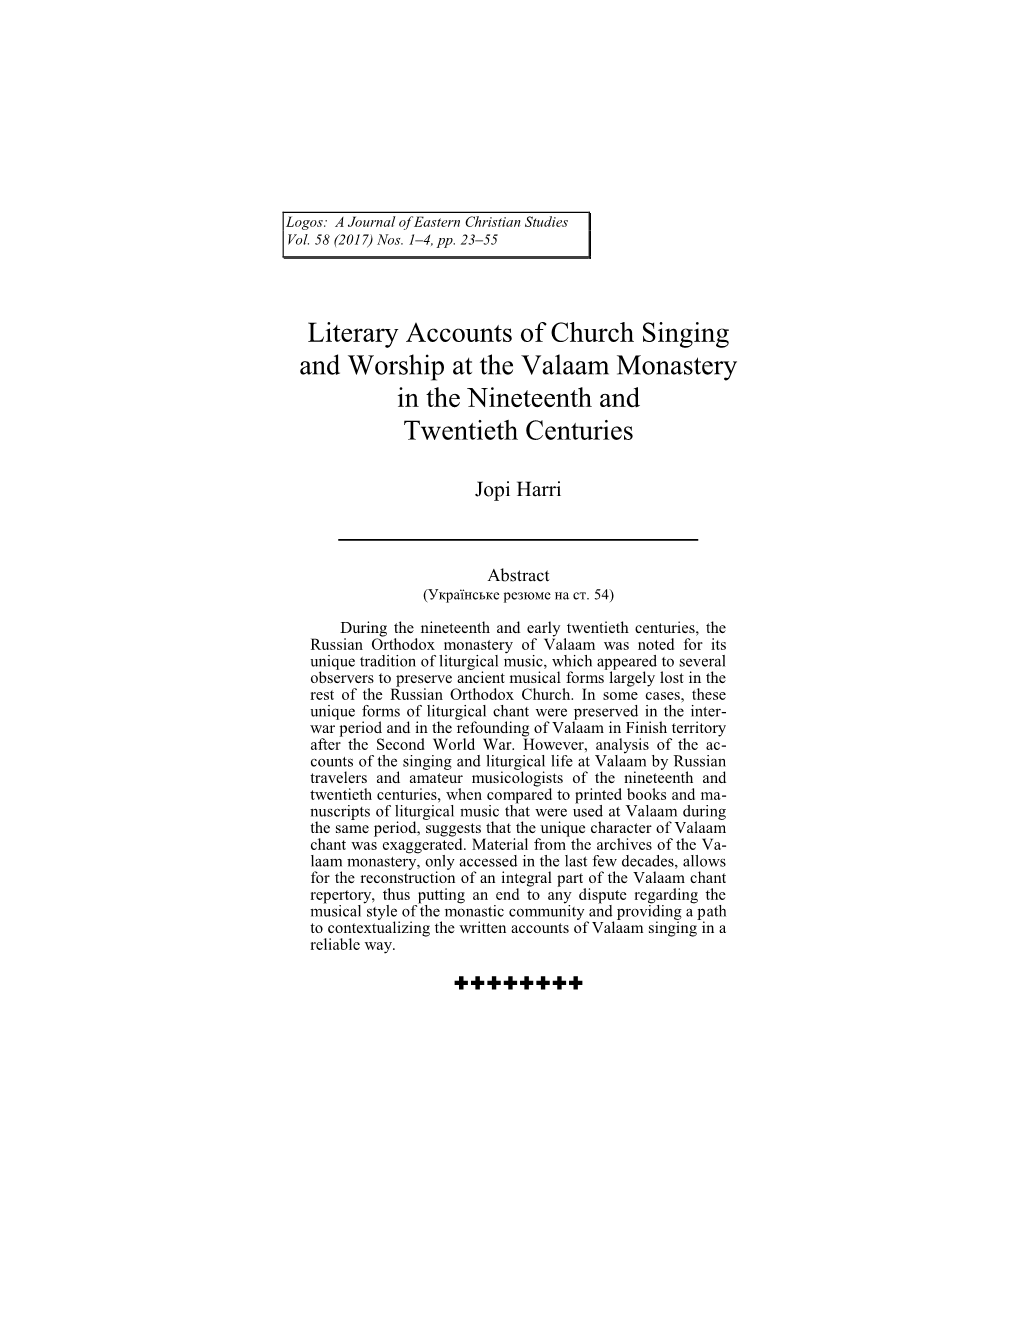 Literary Accounts of Church Singing and Worship at the Valaam Monastery in the Nineteenth and Twentieth Centuries